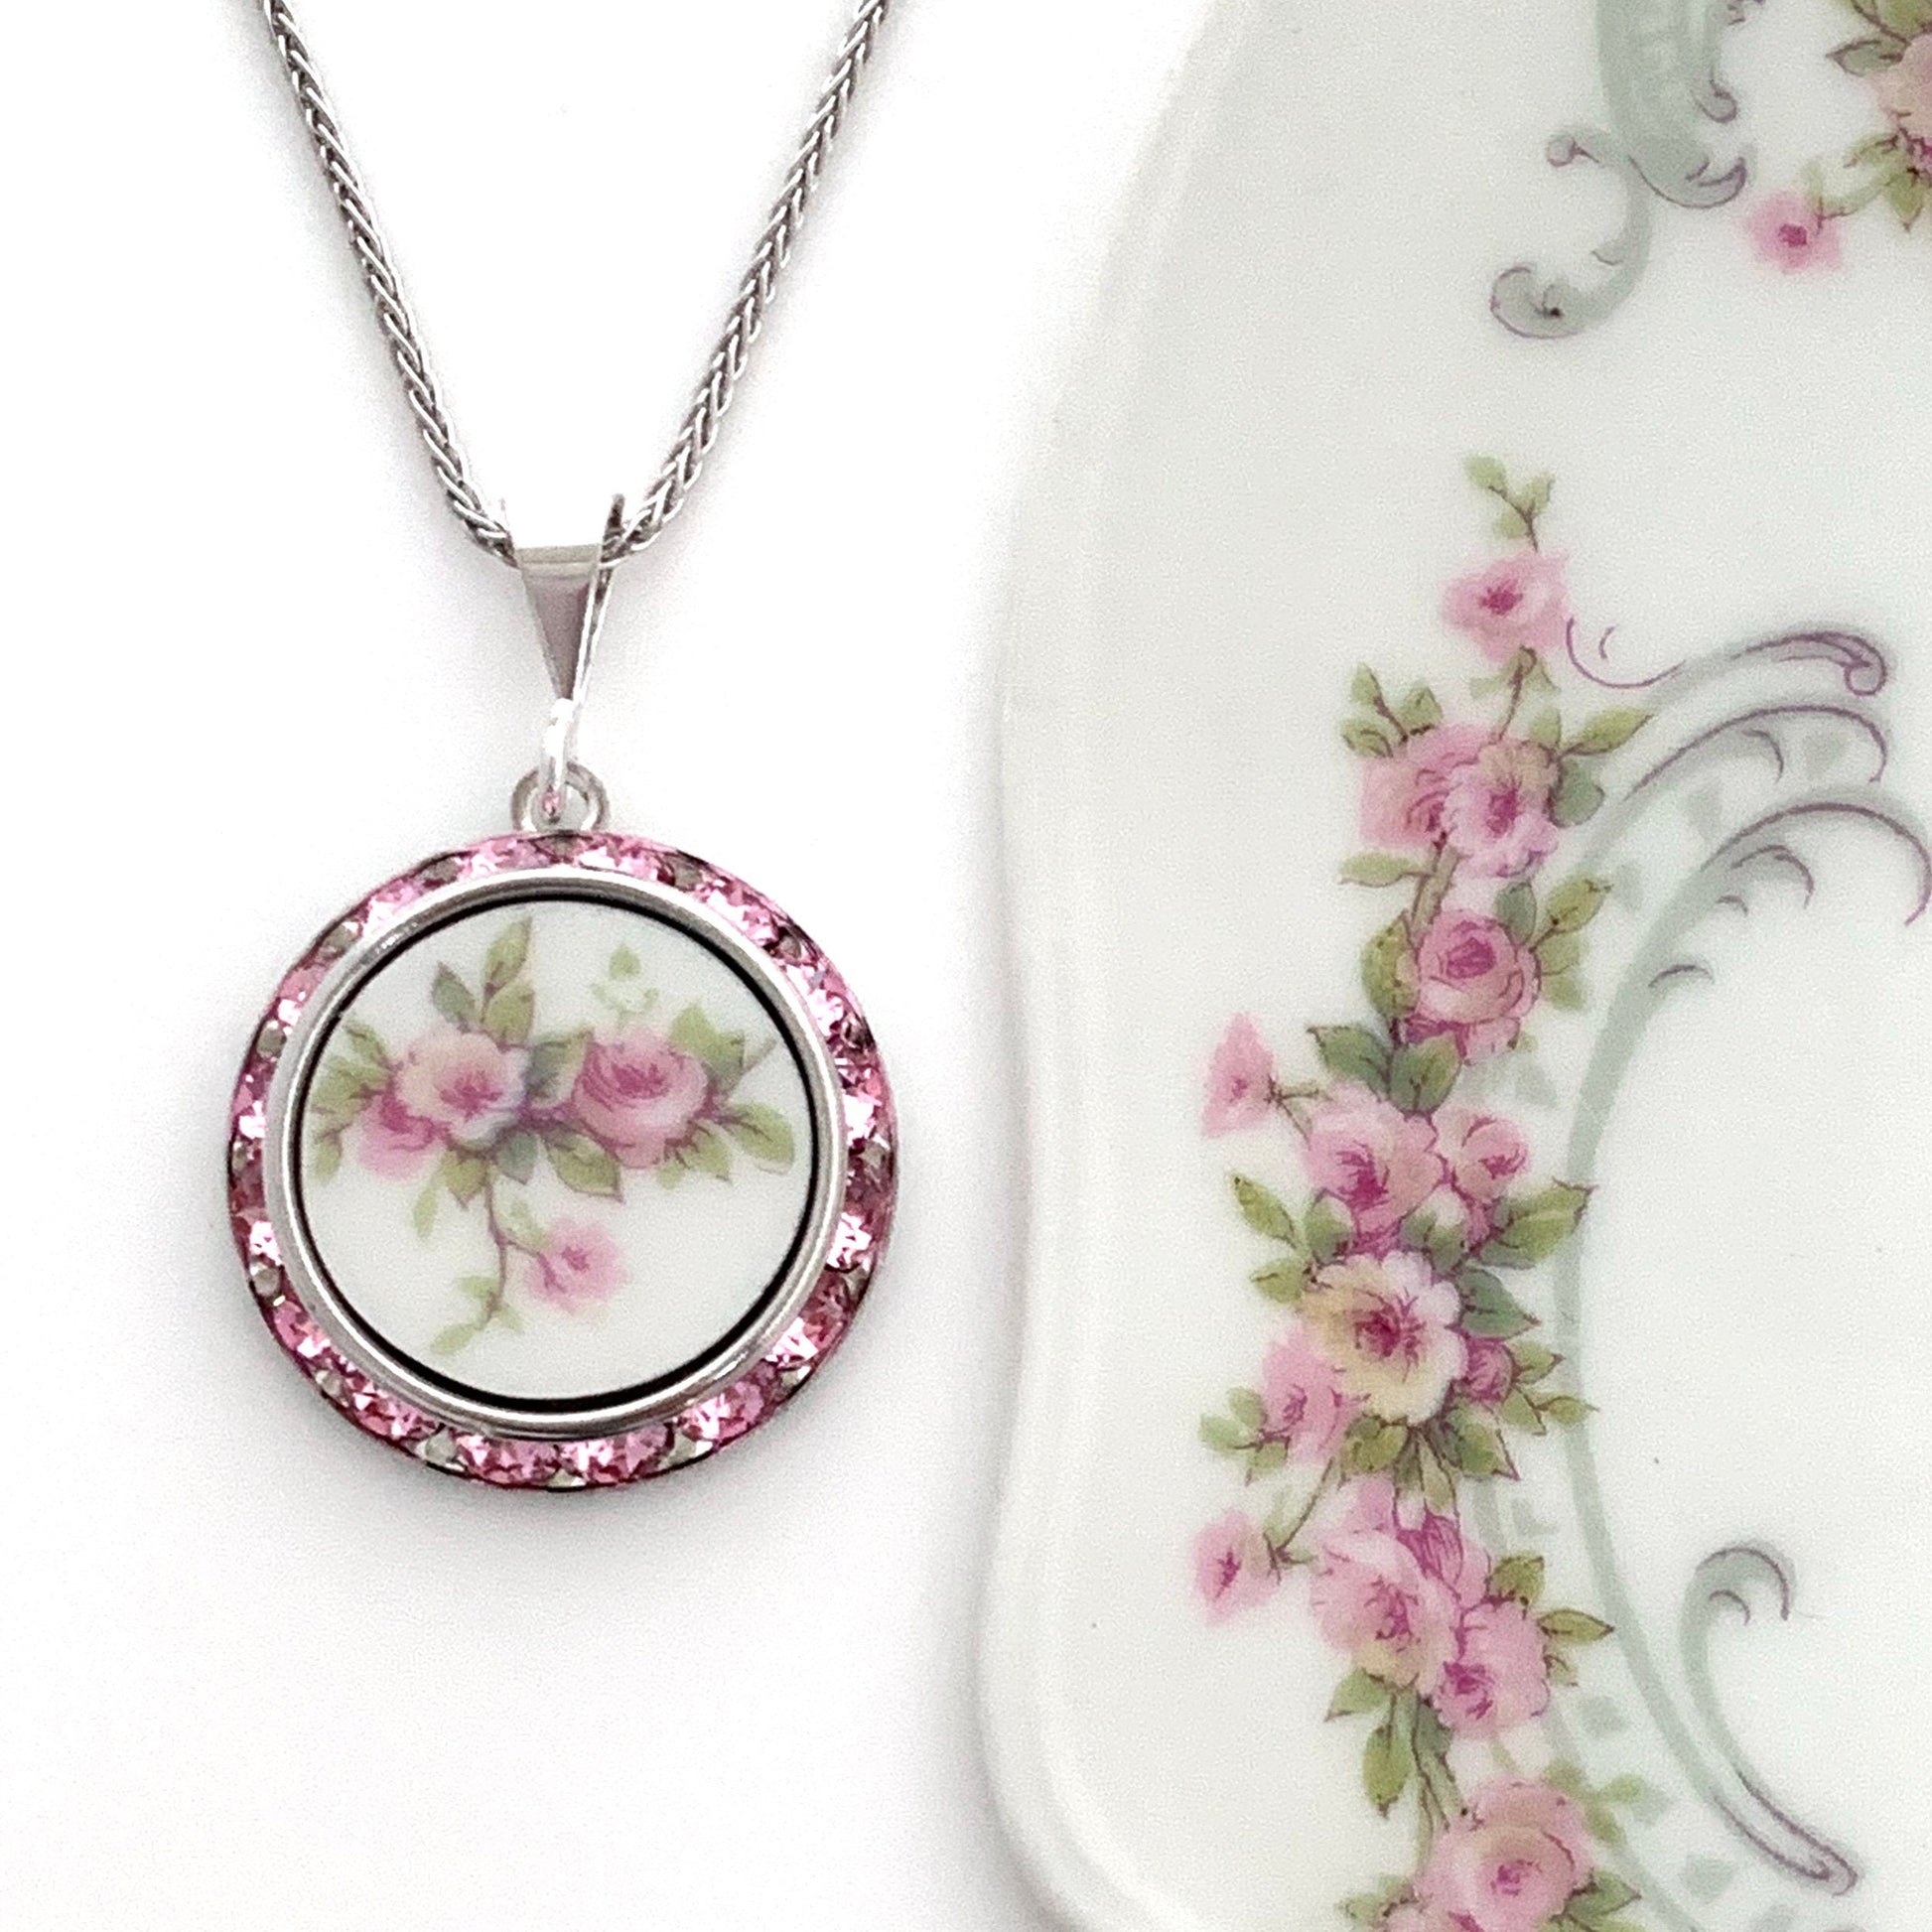 French Limoges China Necklace, 20th Anniversary Gift for Wife, Crystal Necklace, Shabby Chic Broken China Jewelry, Birthday Gift